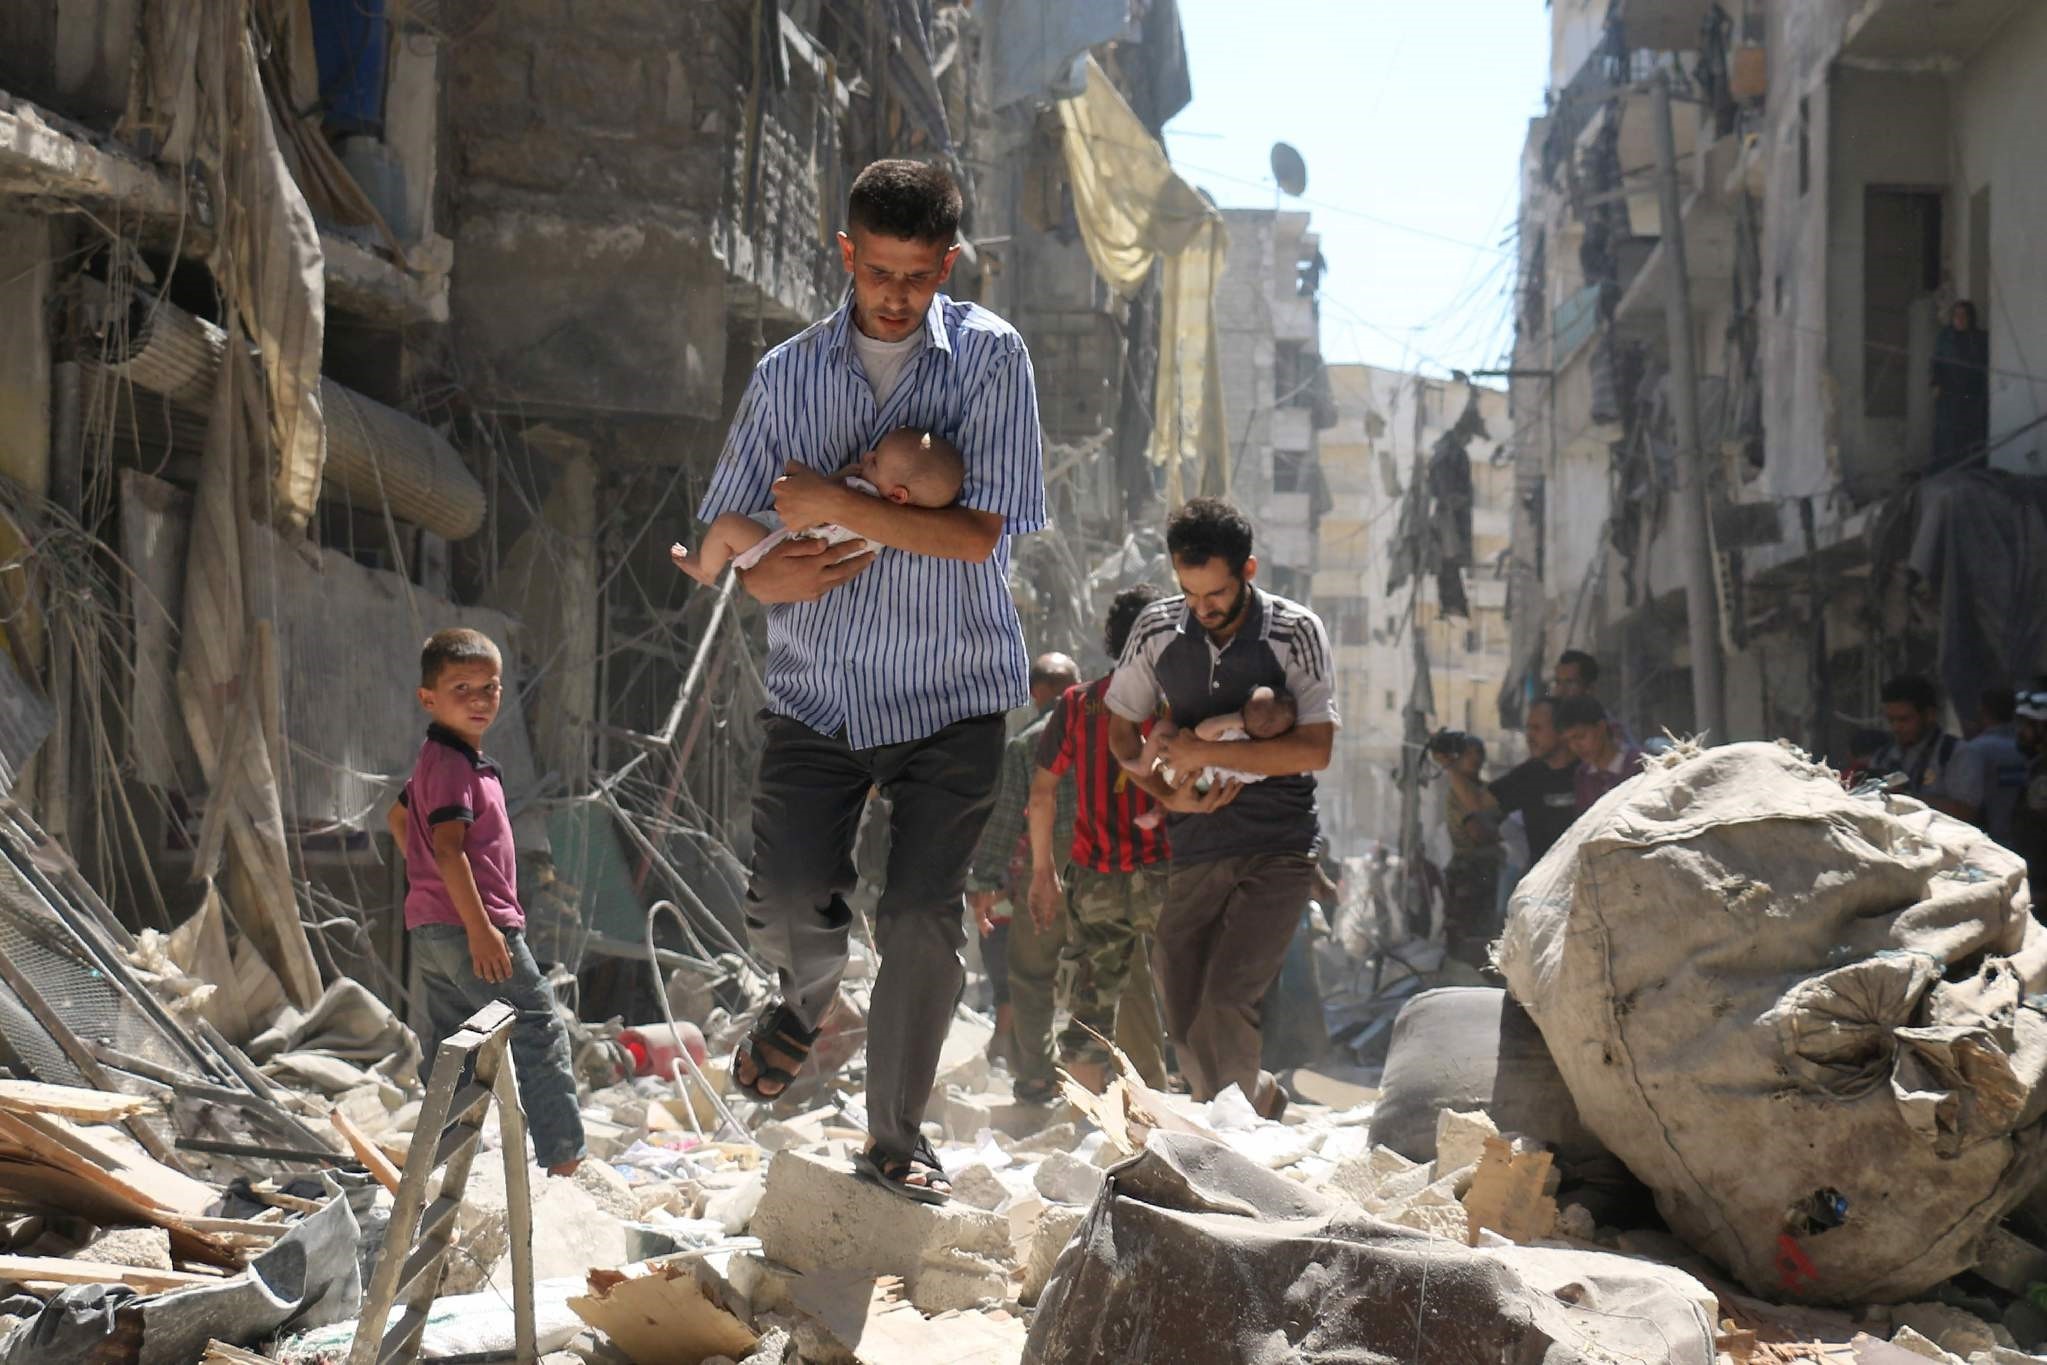 Syrian men carrying babies make their way through the rubble of destroyed buildings following a reported air strike in Aleppo, on September 11, 2016. (AFP Photo)